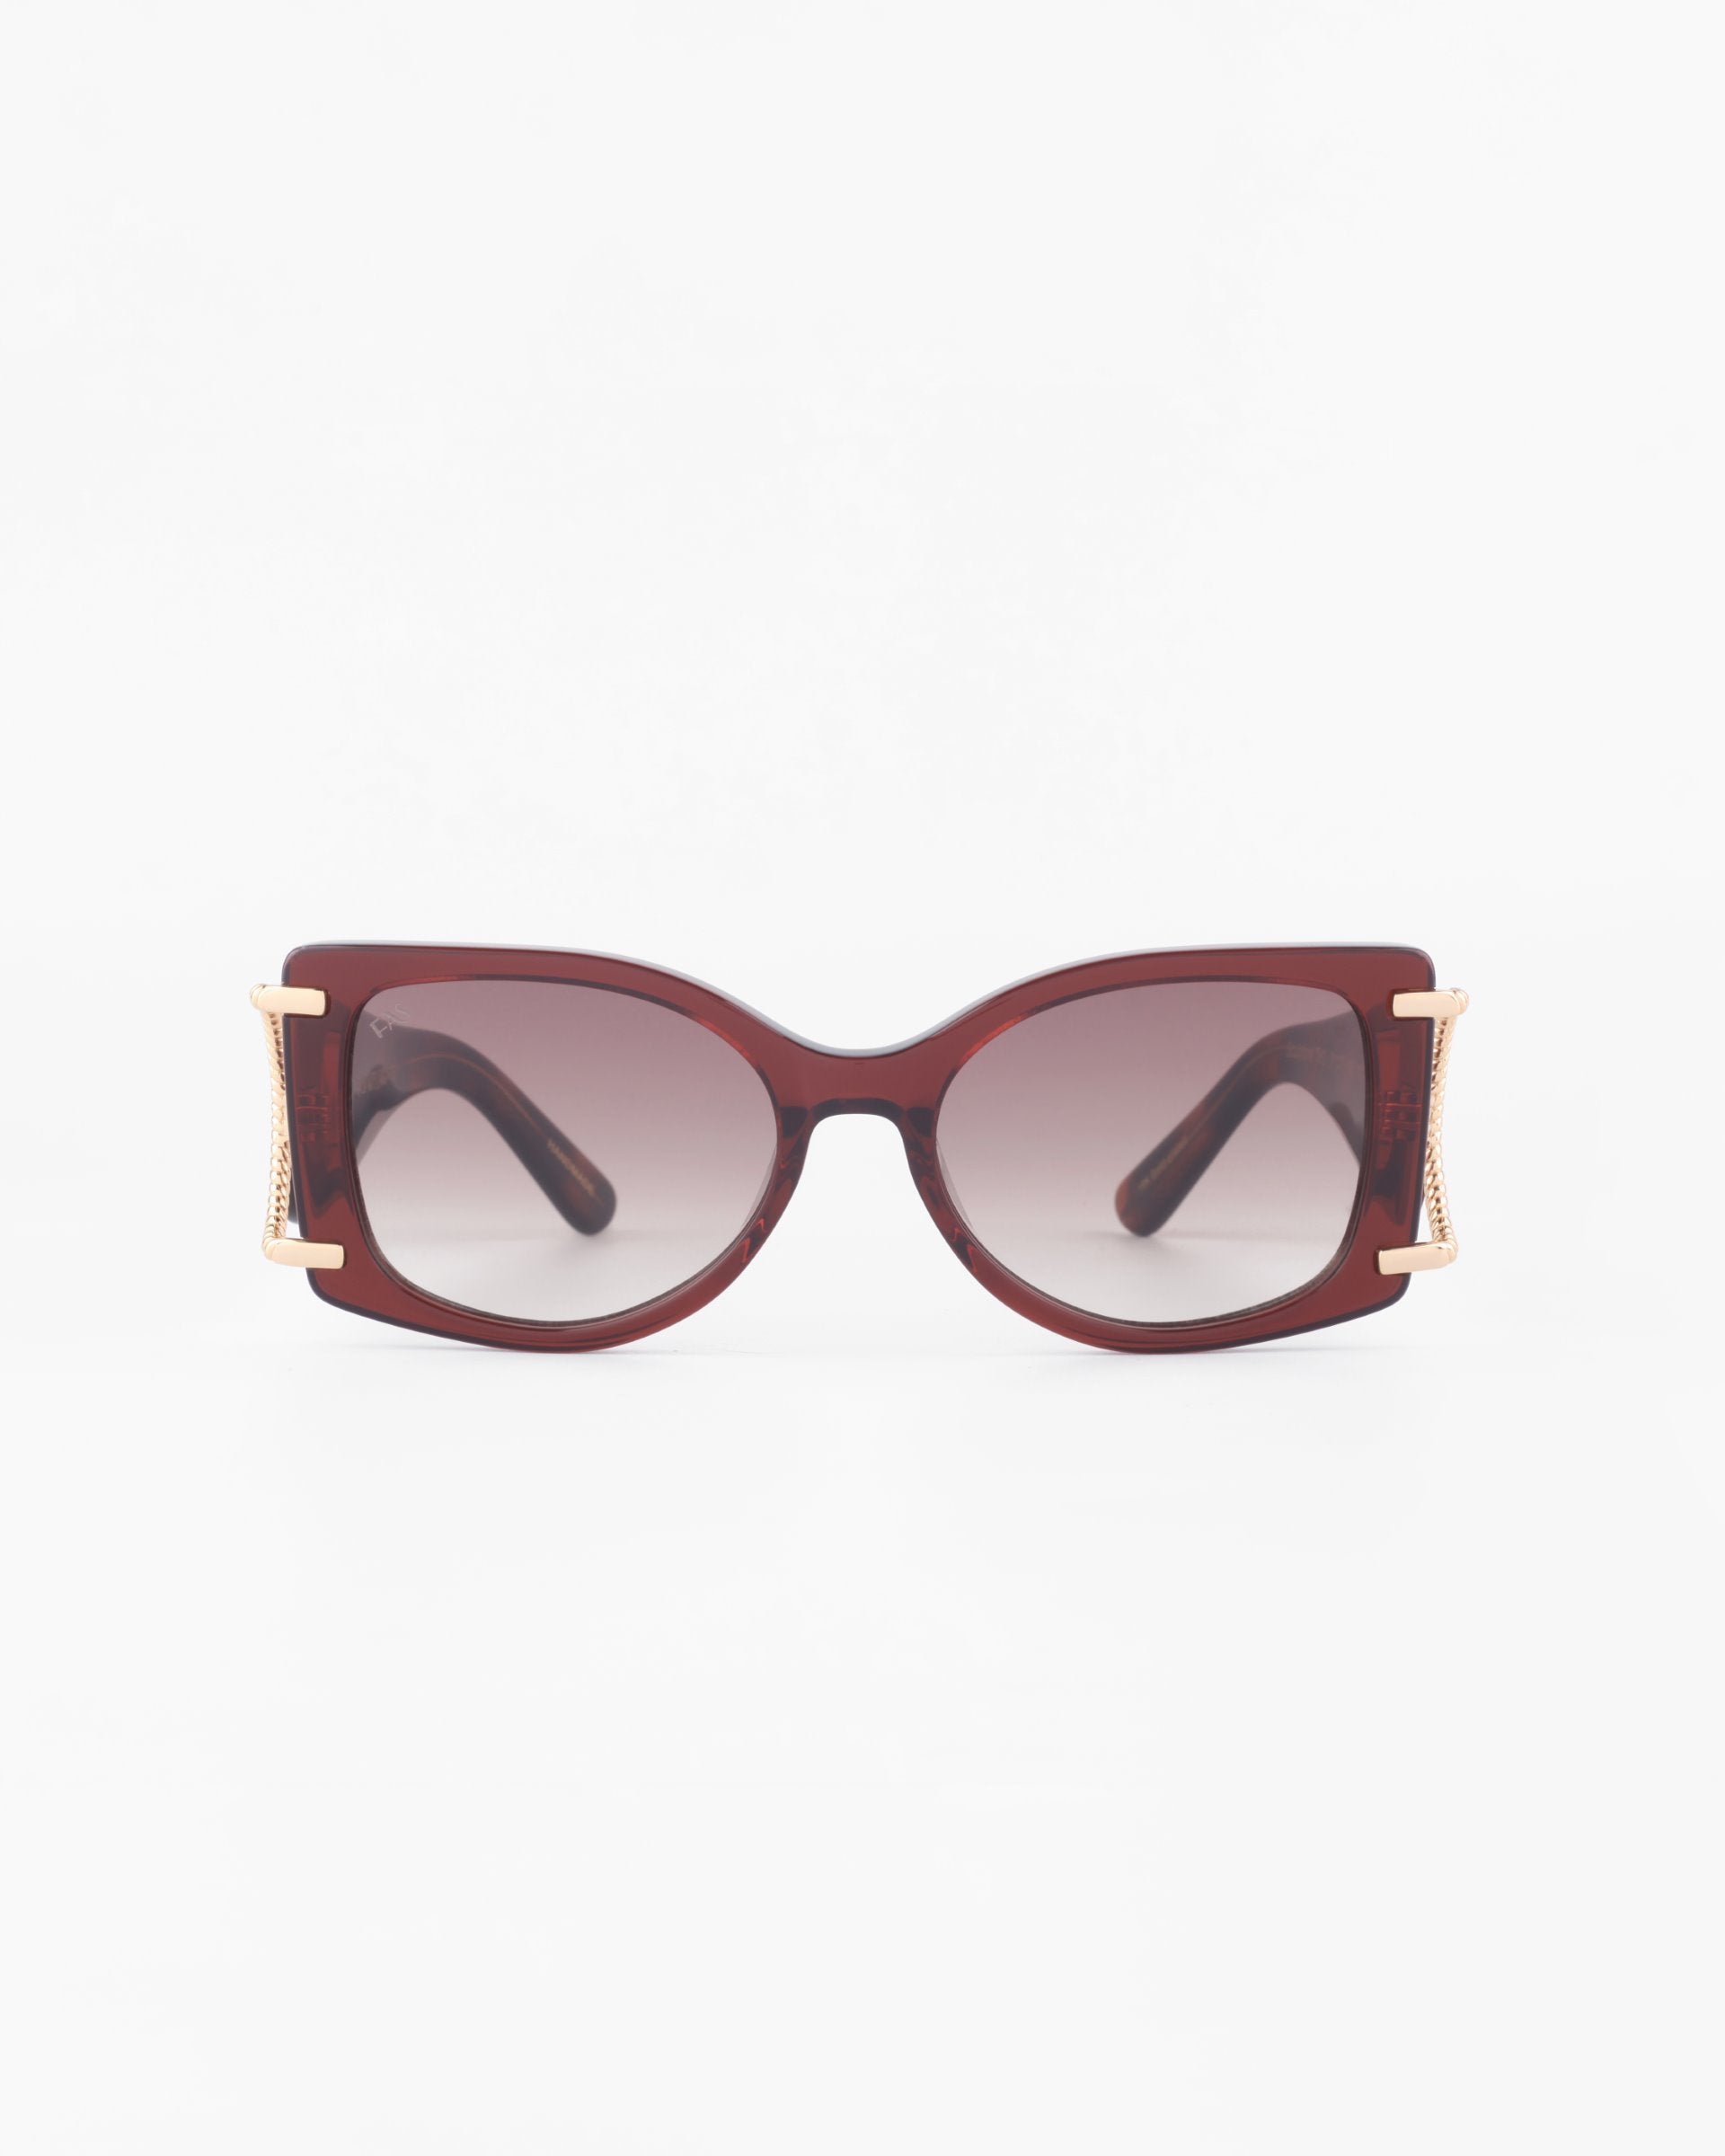 A pair of stylish, oversized acetate sunglasses with dark gradient lenses, a maroon frame, and 18-karat gold-plated accents on the temples. Boasting 100% UVA & UVB protection, the Sculpture glasses by For Art's Sake® are positioned against a white background, showing a frontal view.